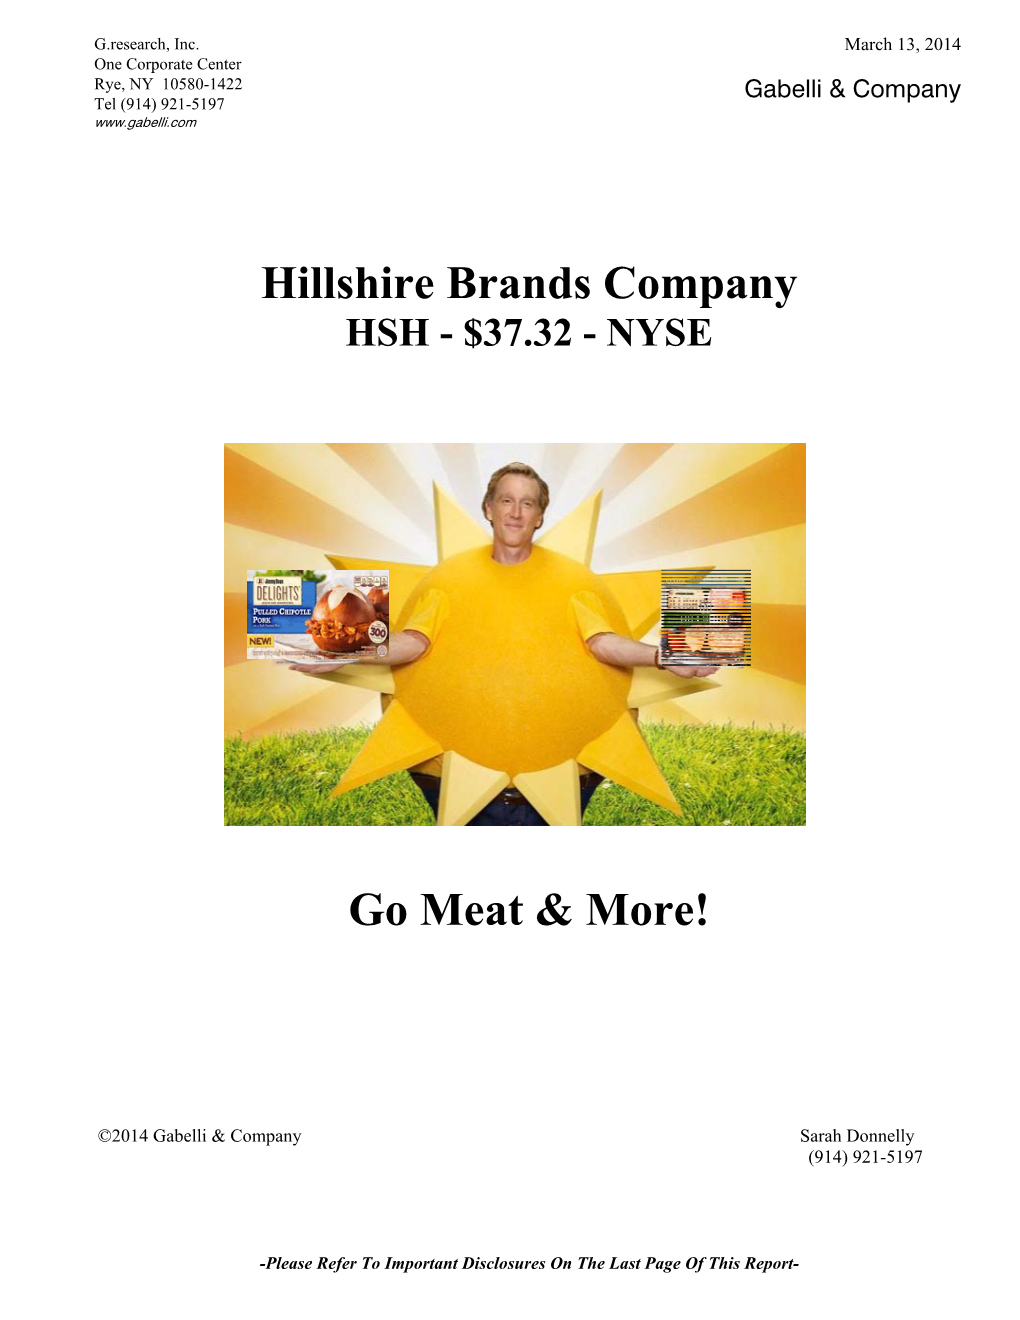 Hillshire Brands Company Go Meat & More!